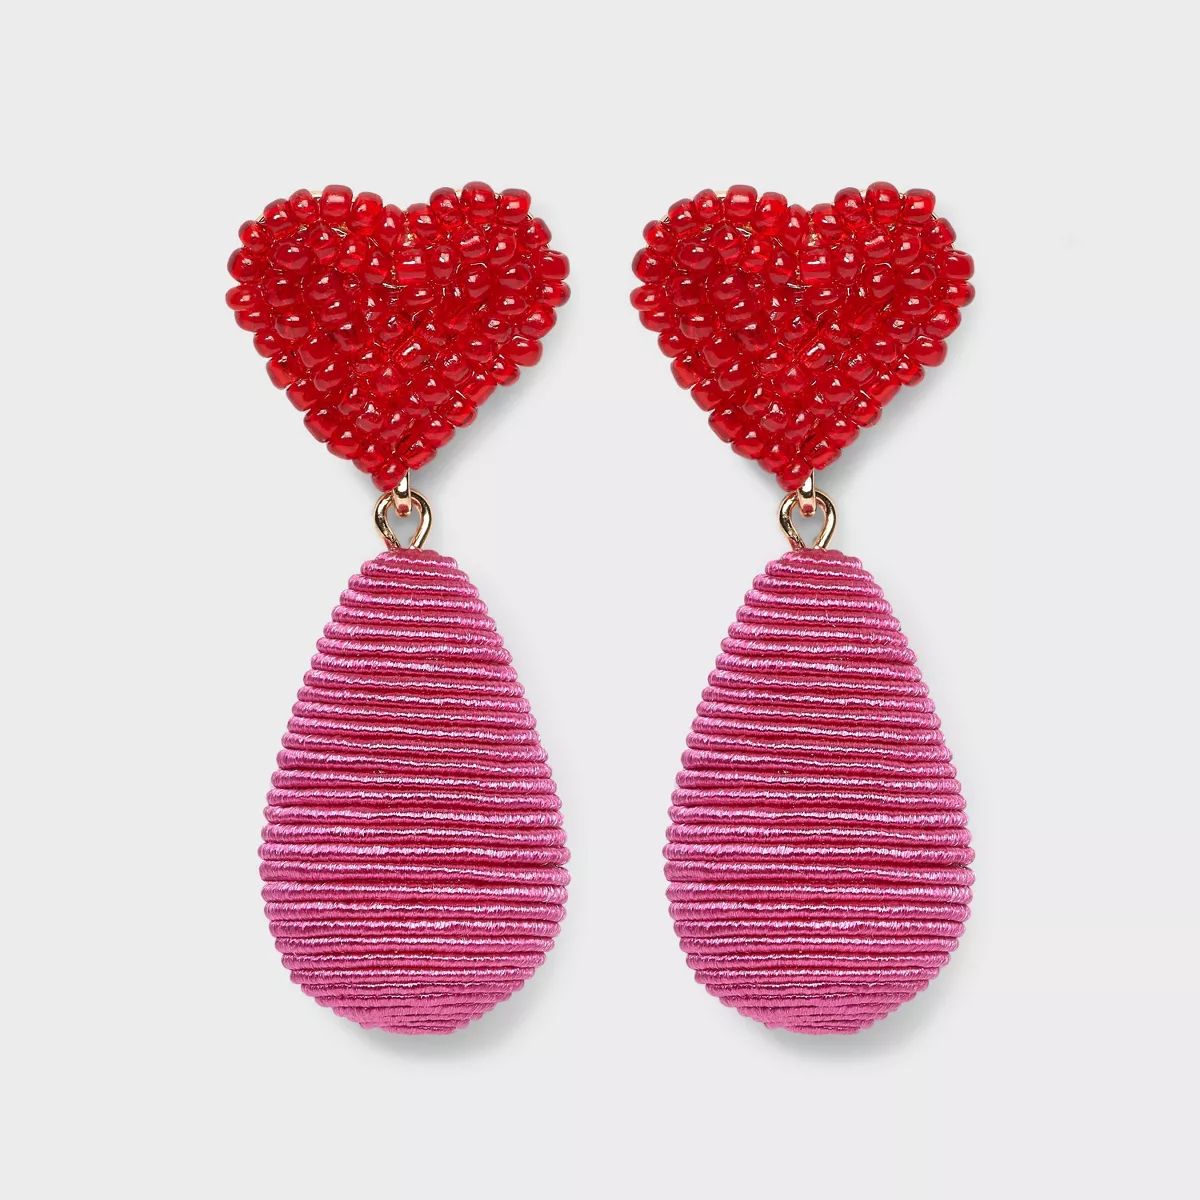 SUGARFIX by BaubleBar Adoring Adornment Statement Earrings - Red/Pink | Target